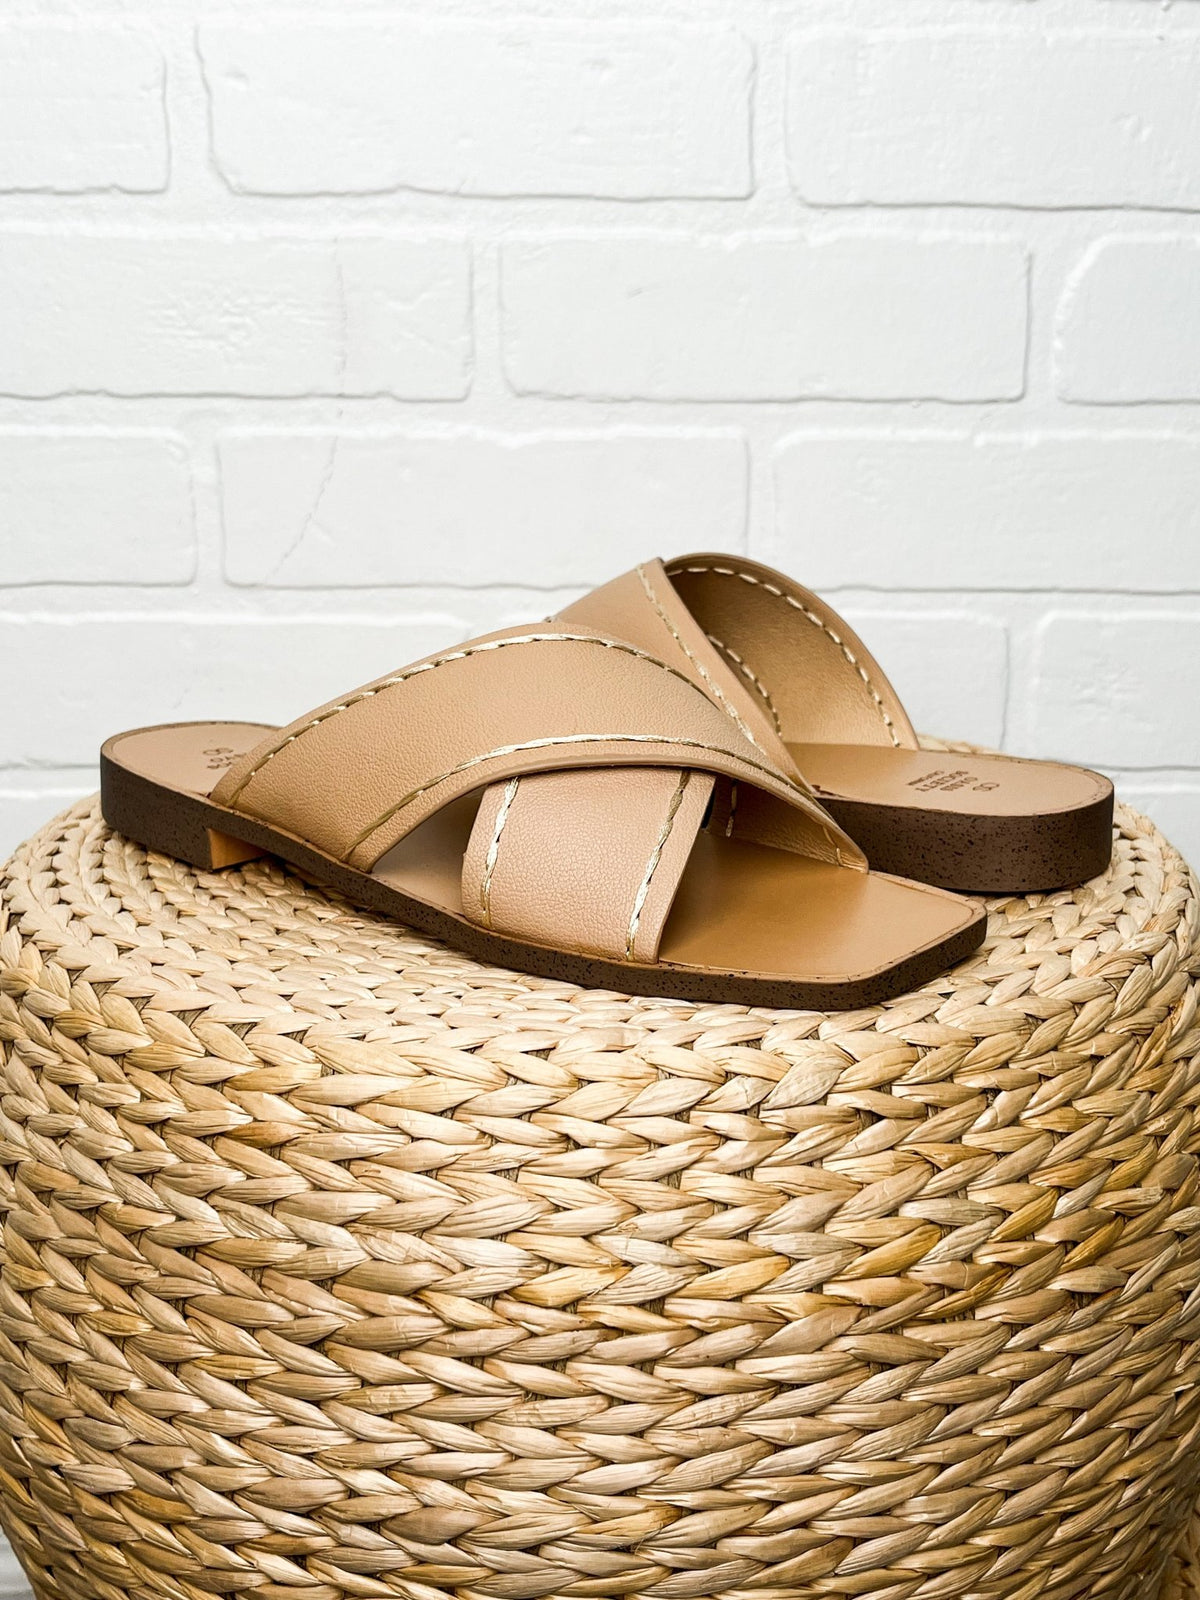 Stella criss cross sandals nude - Cute shoes - Trendy Shoes at Lush Fashion Lounge Boutique in Oklahoma City